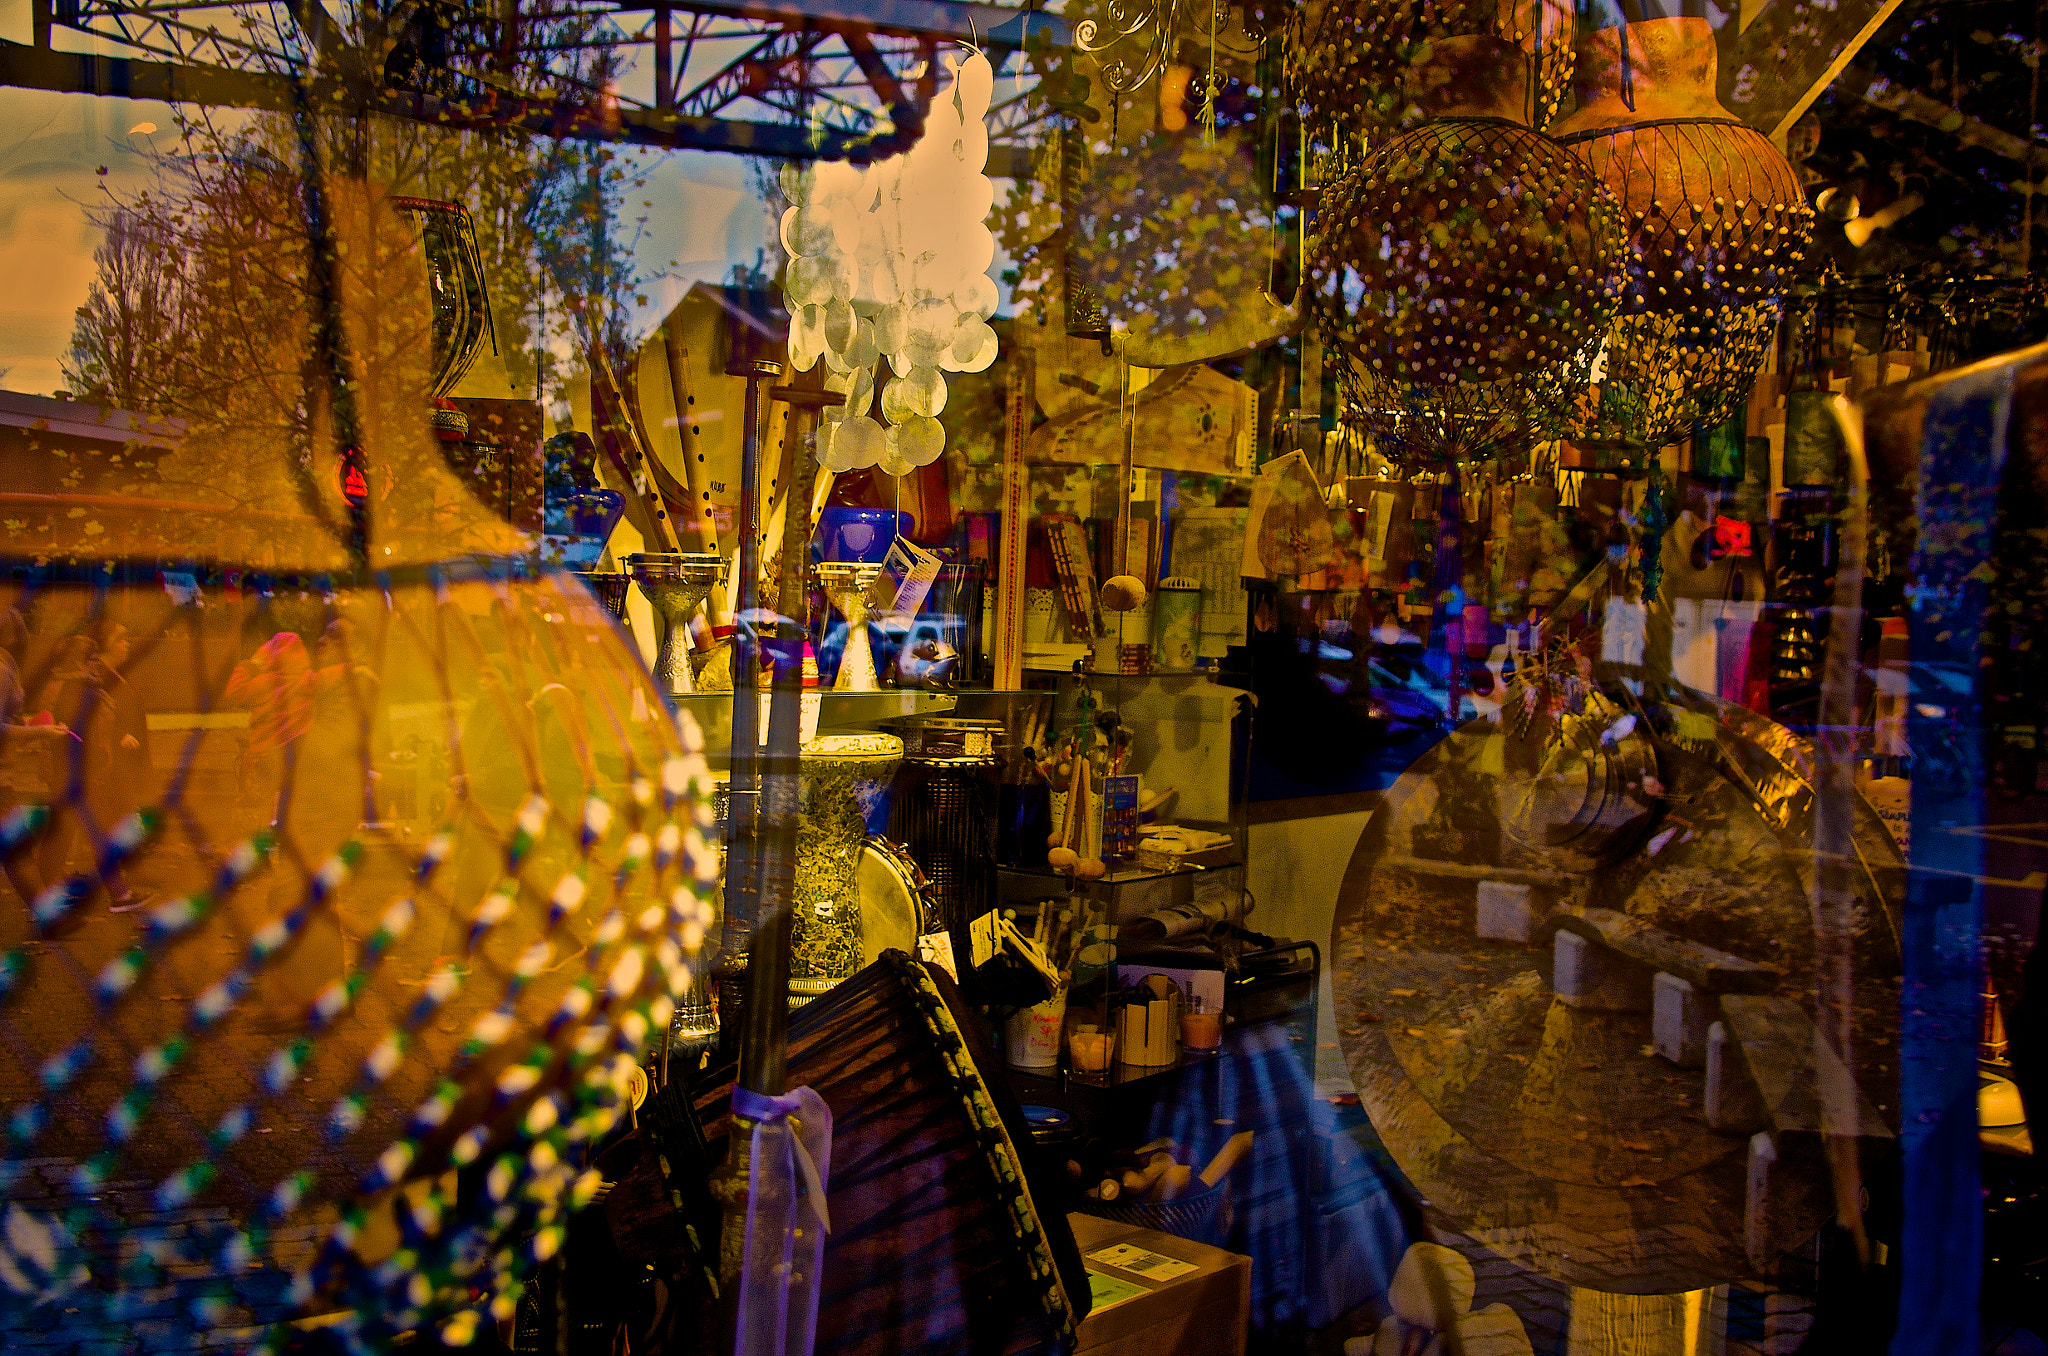 Pentax K-5 sample photo. Majors and minors reflections in a music store win photography